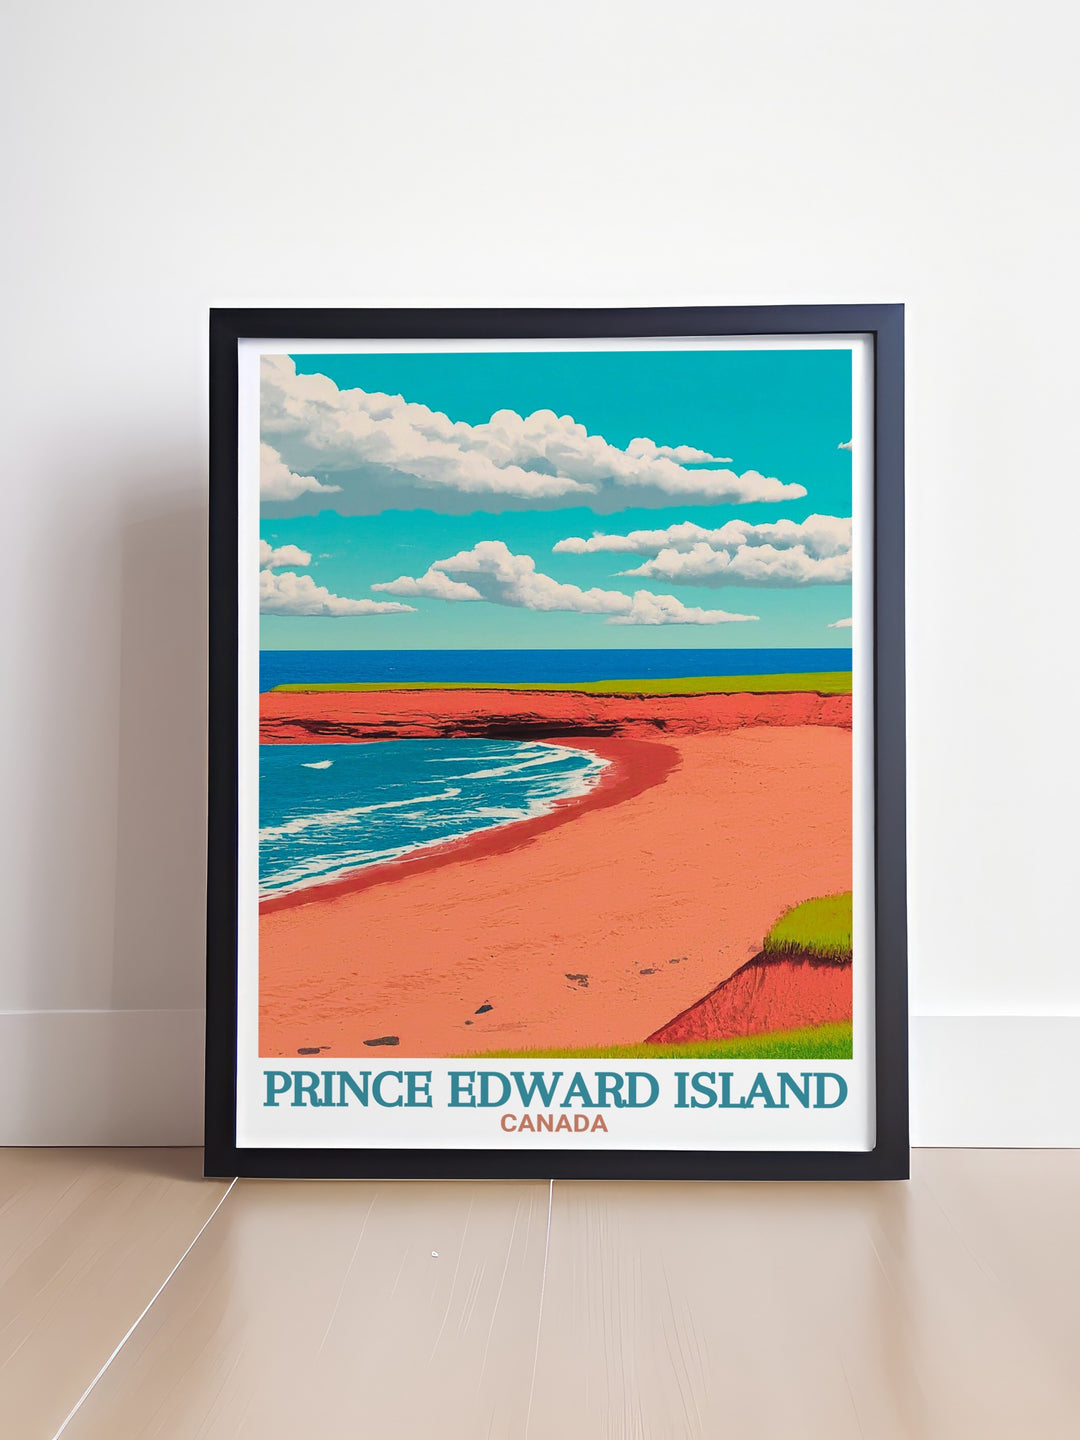 Cavendish Beach framed prints featuring the beautiful shoreline and vibrant sunsets of Prince Edward Island offering modern art and elegant home decor that brings a touch of serenity and inspiration to any living space.